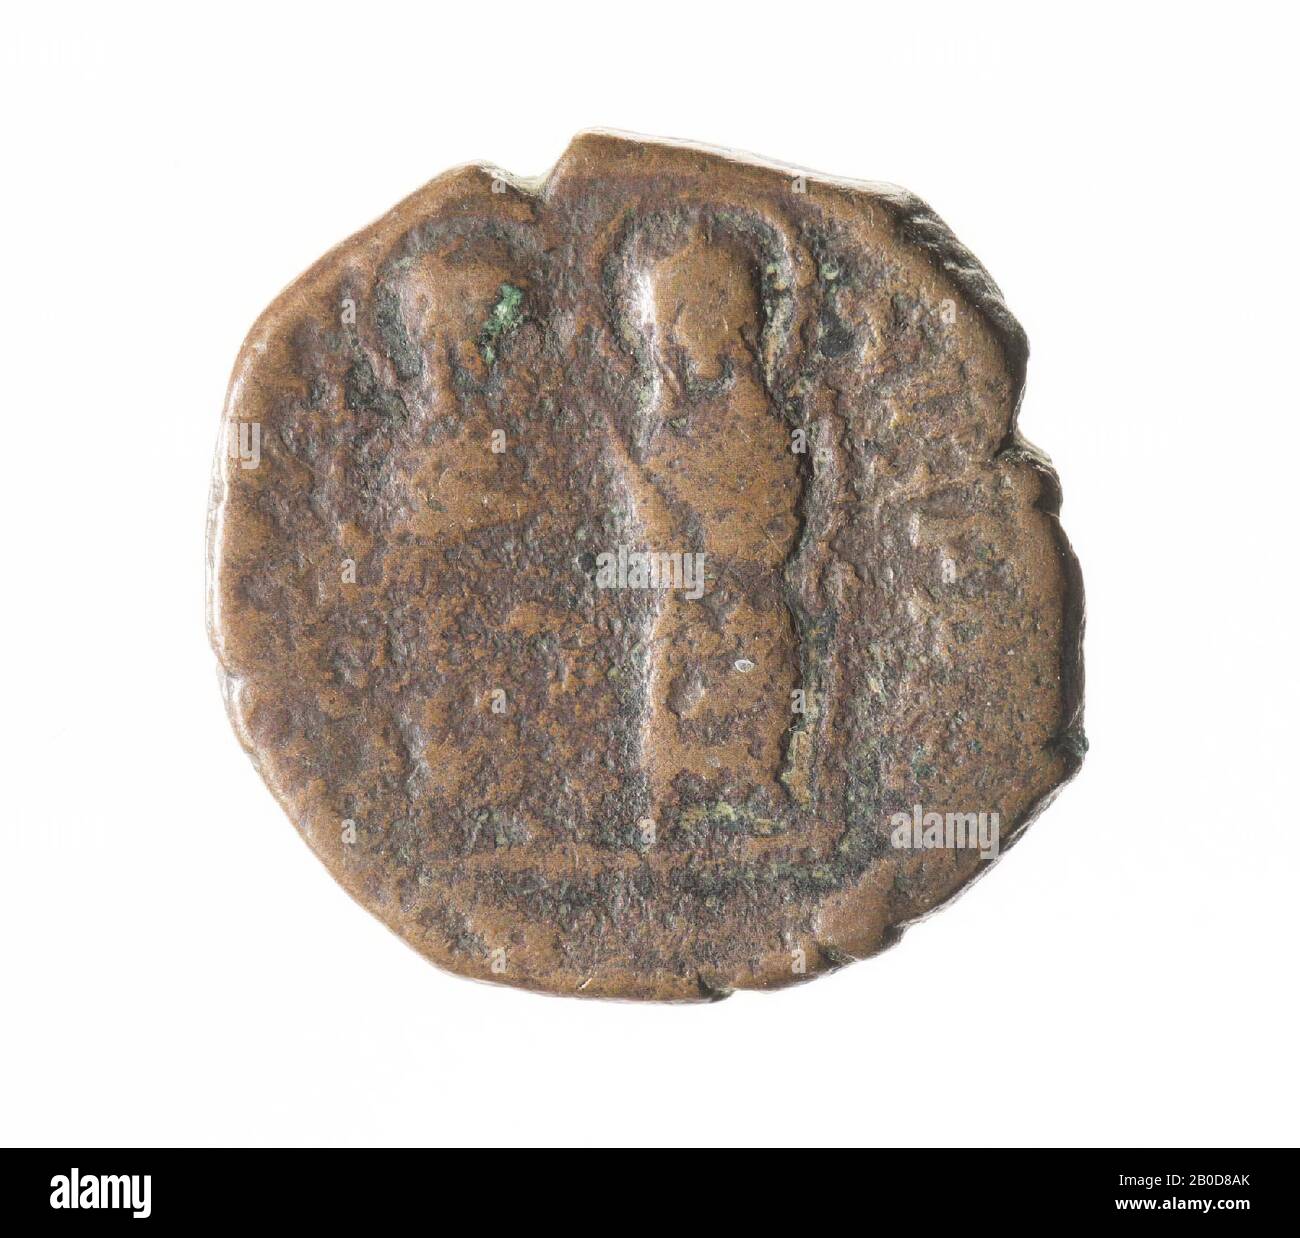 Front: Justin and Sophia, sitting on throne, both with nimbus. Justinus holds the world globe with cross and Sophia with right scepter with cross. Worn, remains of inscription. Reverse: Large K, ANNO left, cross top, government year right, TES bottom. The large (Greek) letter stands for a number and indicates the coin value. K is 20 nummi, a half follis. The letters at the bottom refer to the place where the coin is minted., Mint, half follis of Justin II, Byzantine, metal, bronze, diam: 1.9 cm, wt. 5.47 grams, 565-578 AD, unknown Stock Photo